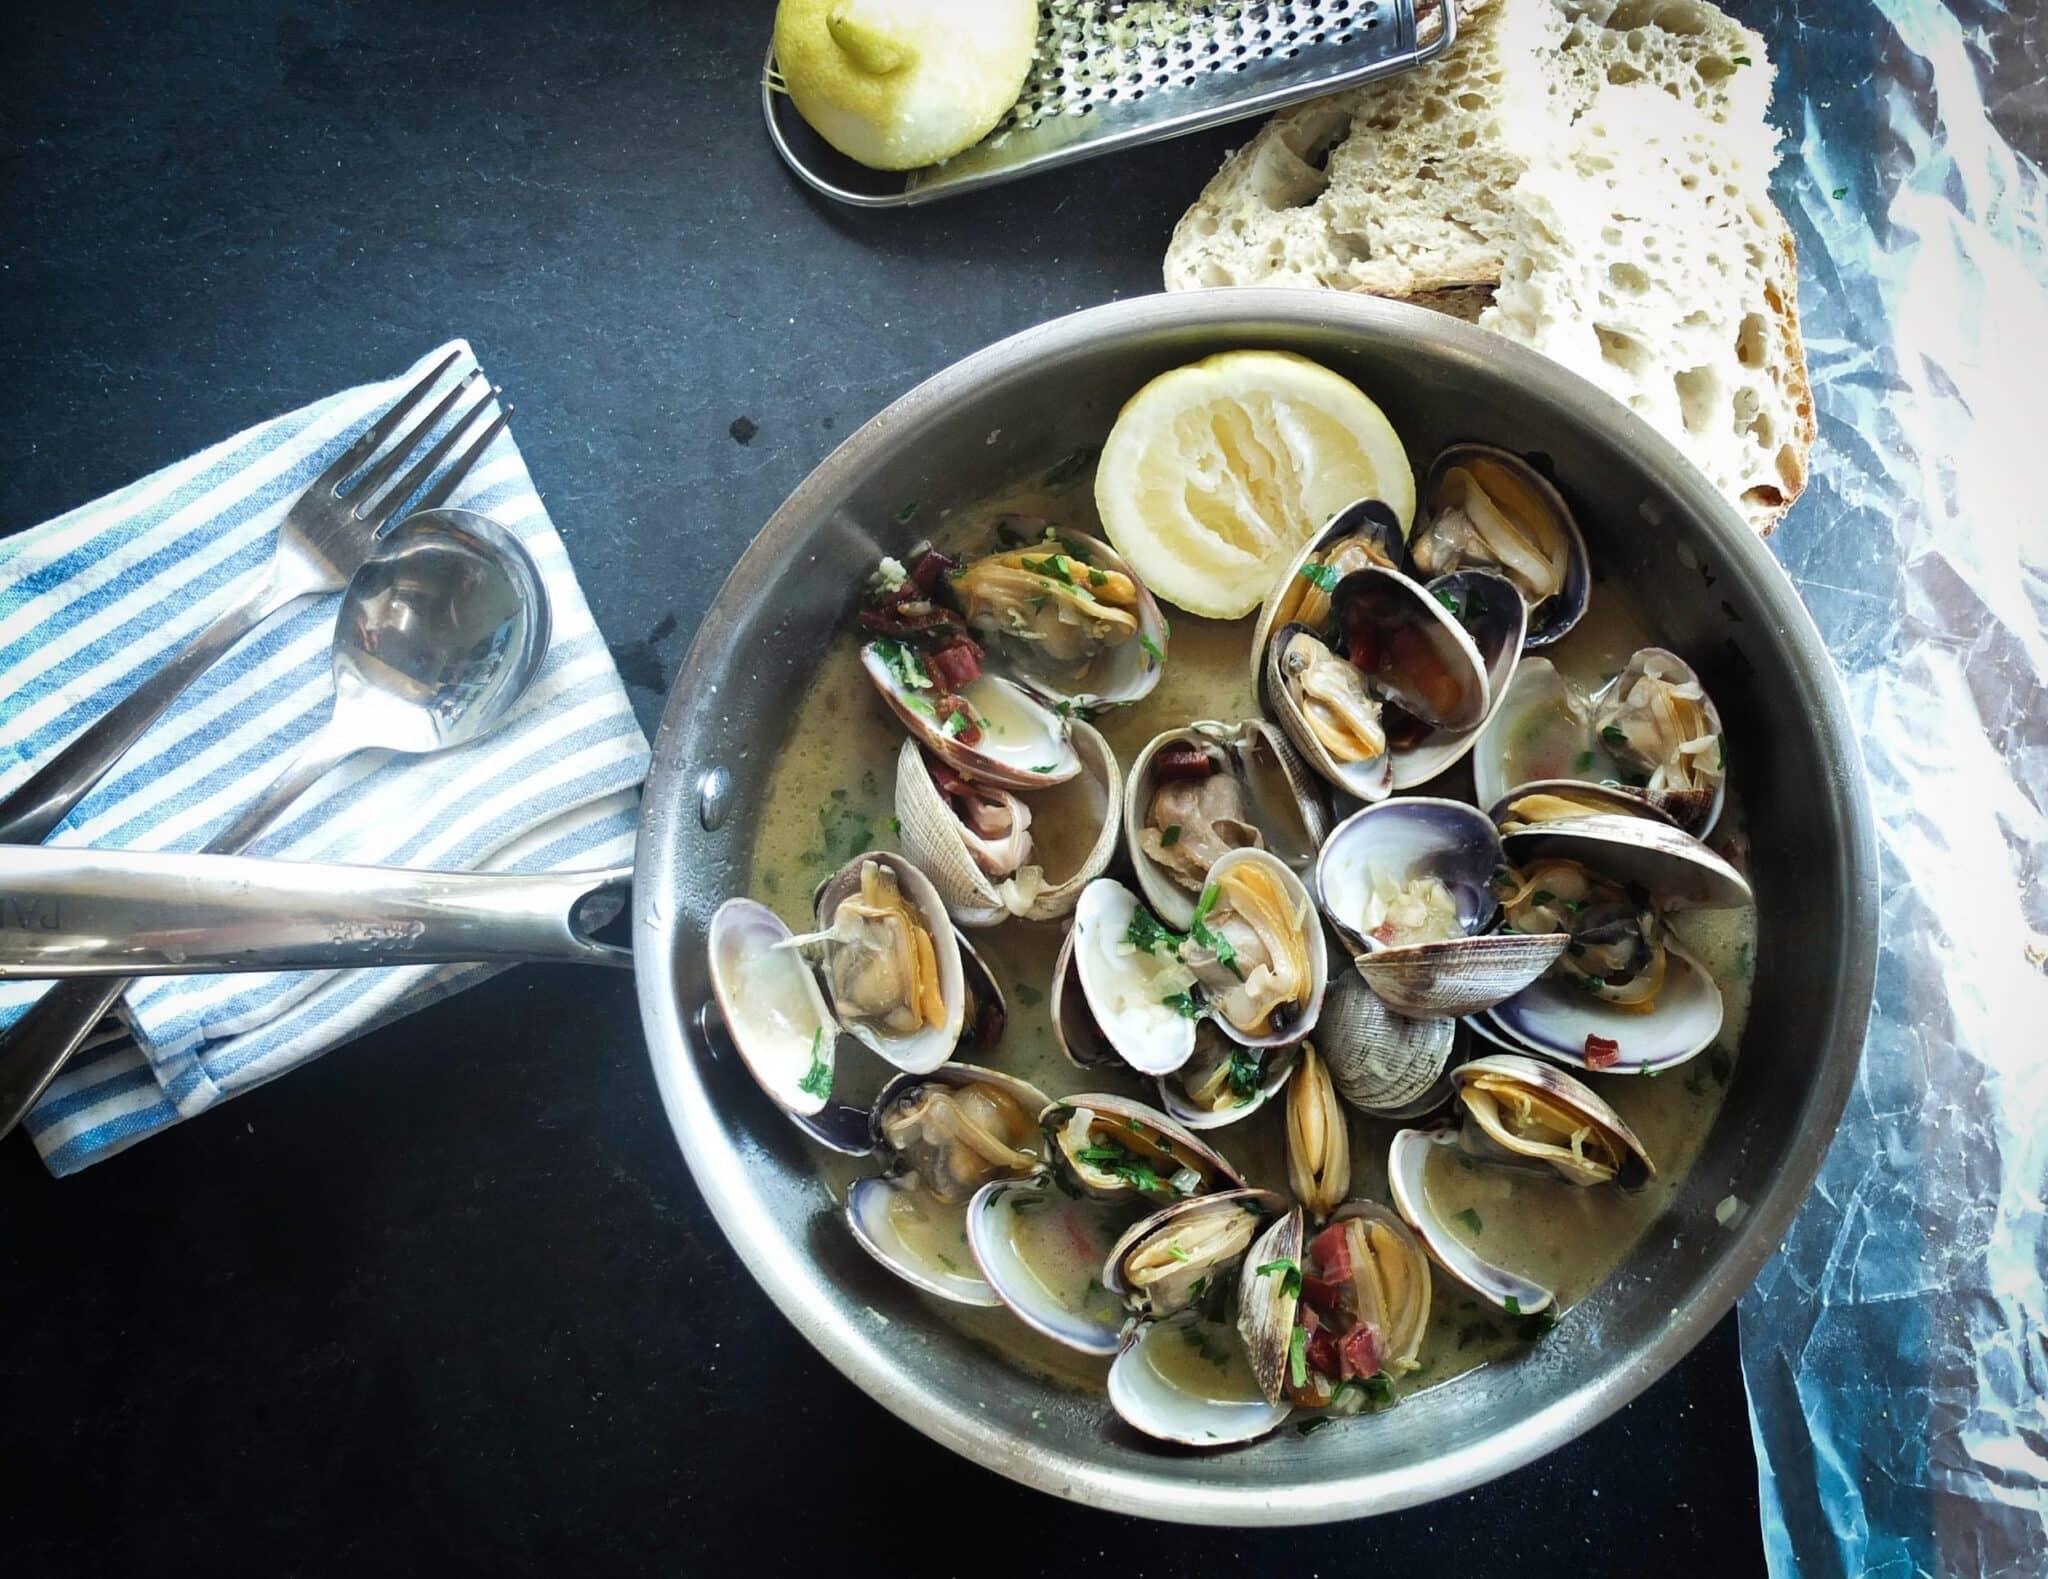 5 Fish and Shellfish to Try During National Seafood Month